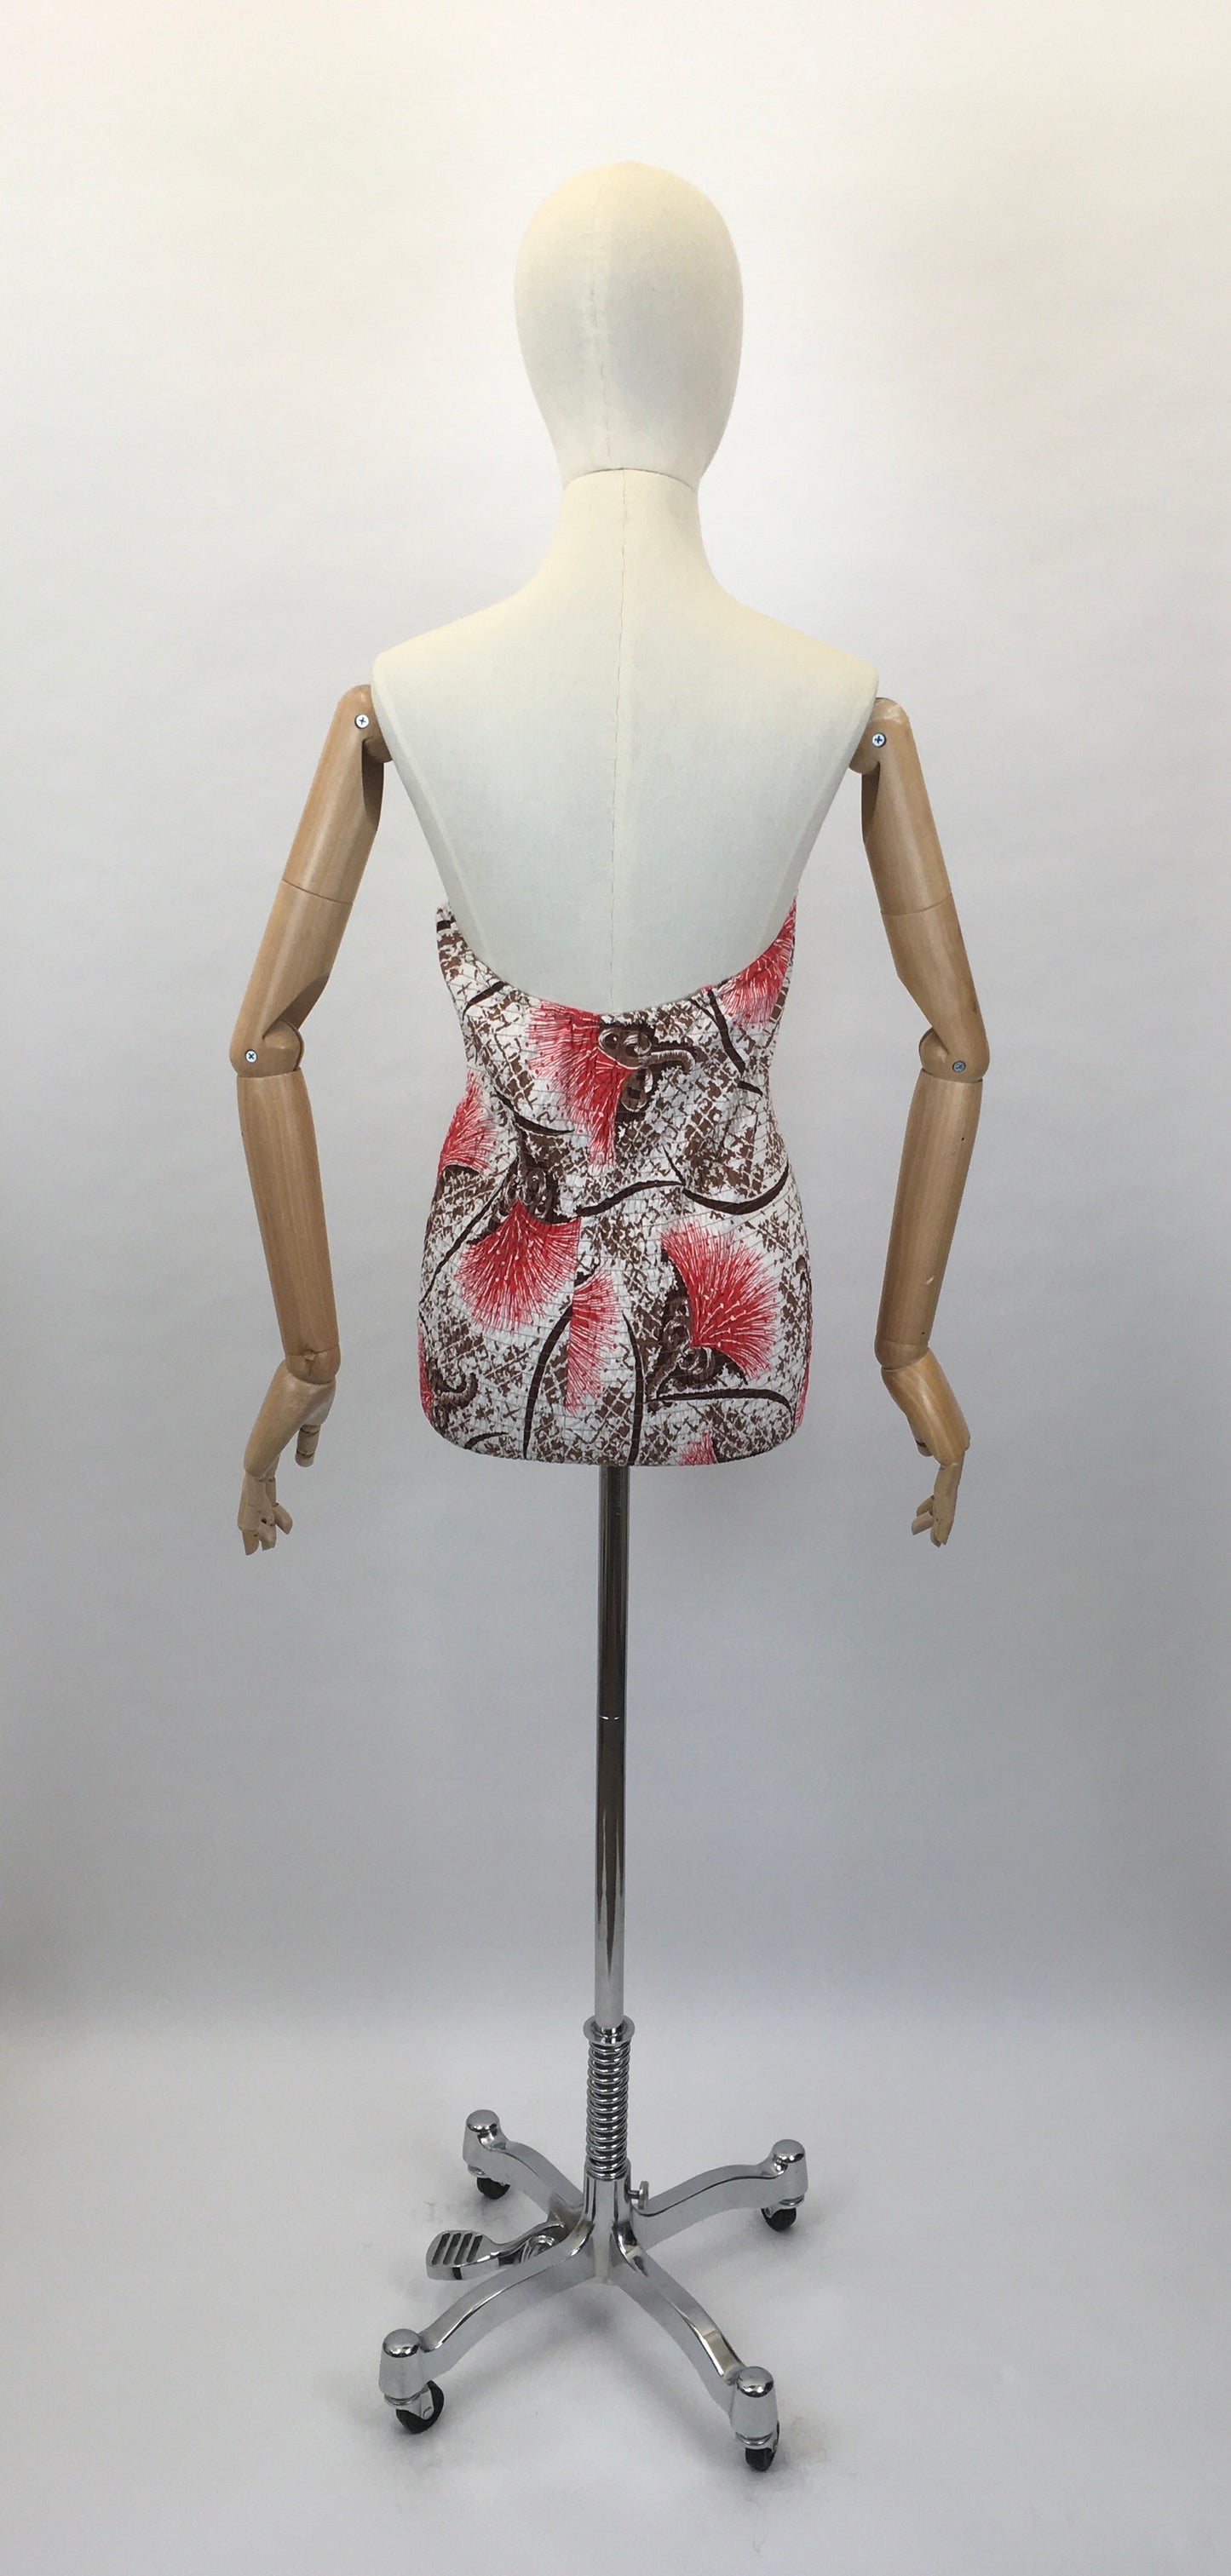 Original Late 1940s early 1950’s Bathing Costume - In a Fabulous Brown and Bright Coral Cotton